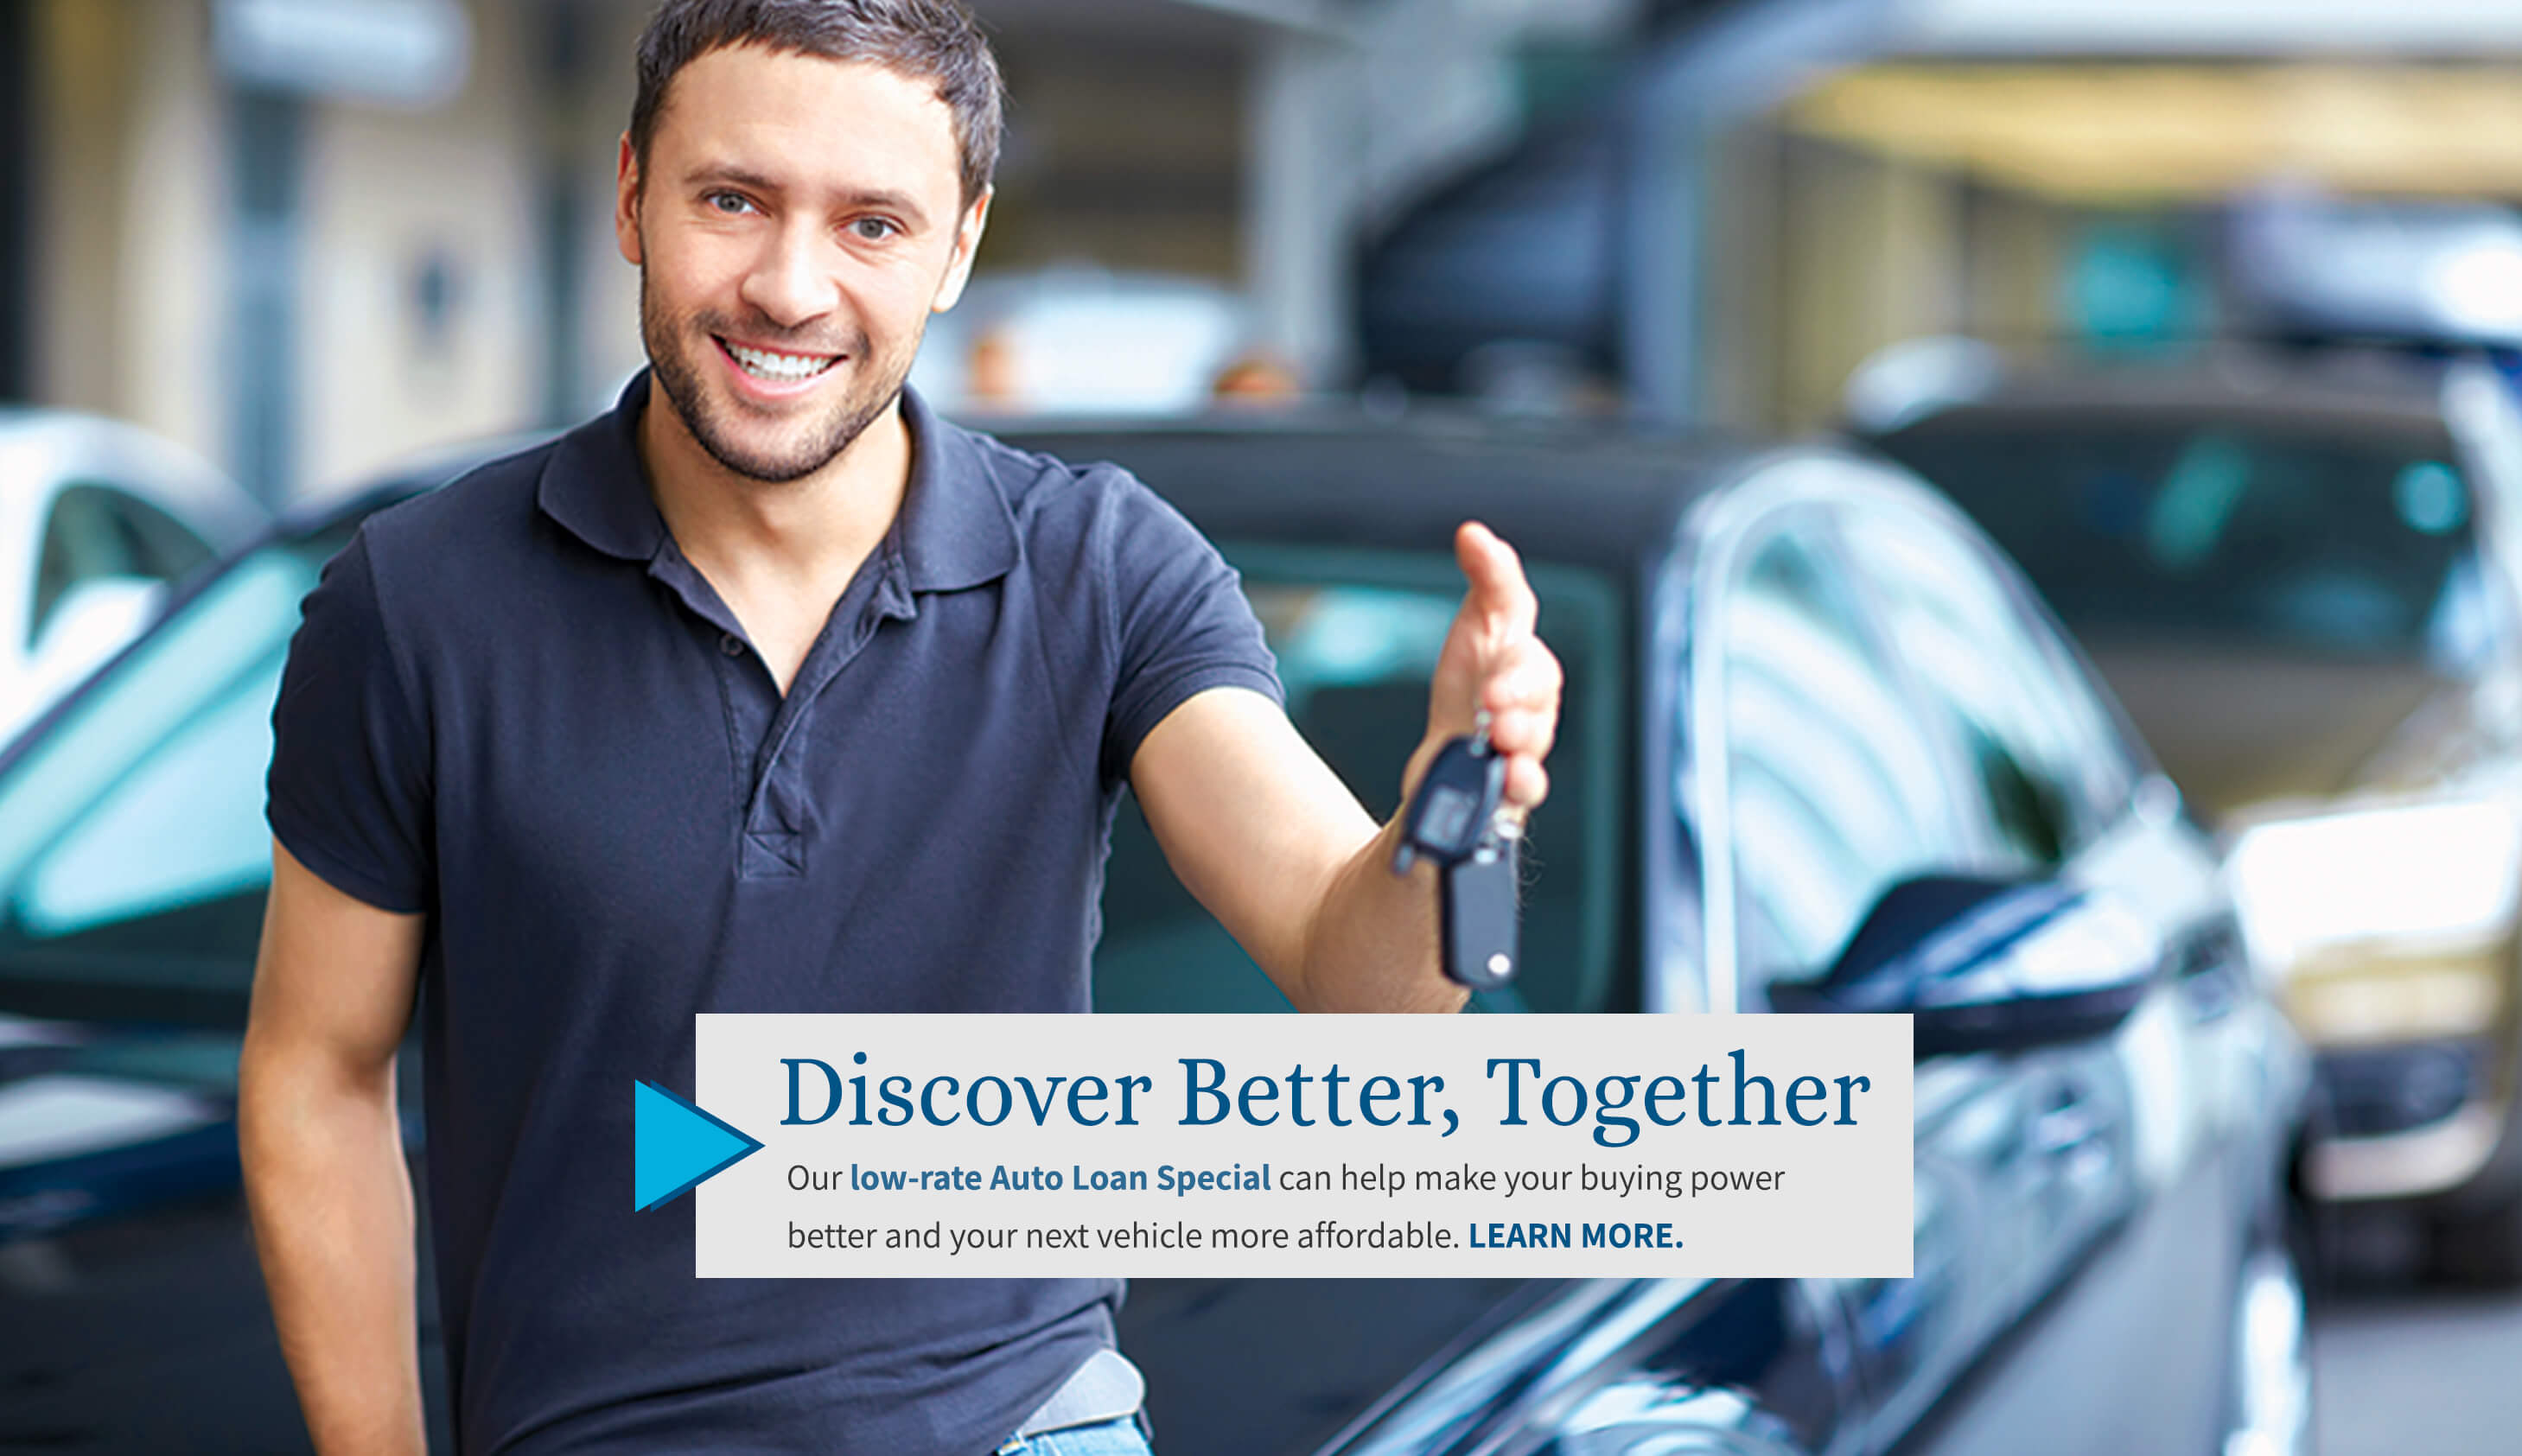 Discover Better, Together. A low-rate Auto Loan Special that will make buying your next vehicle a little better and more affordable. Learn More.